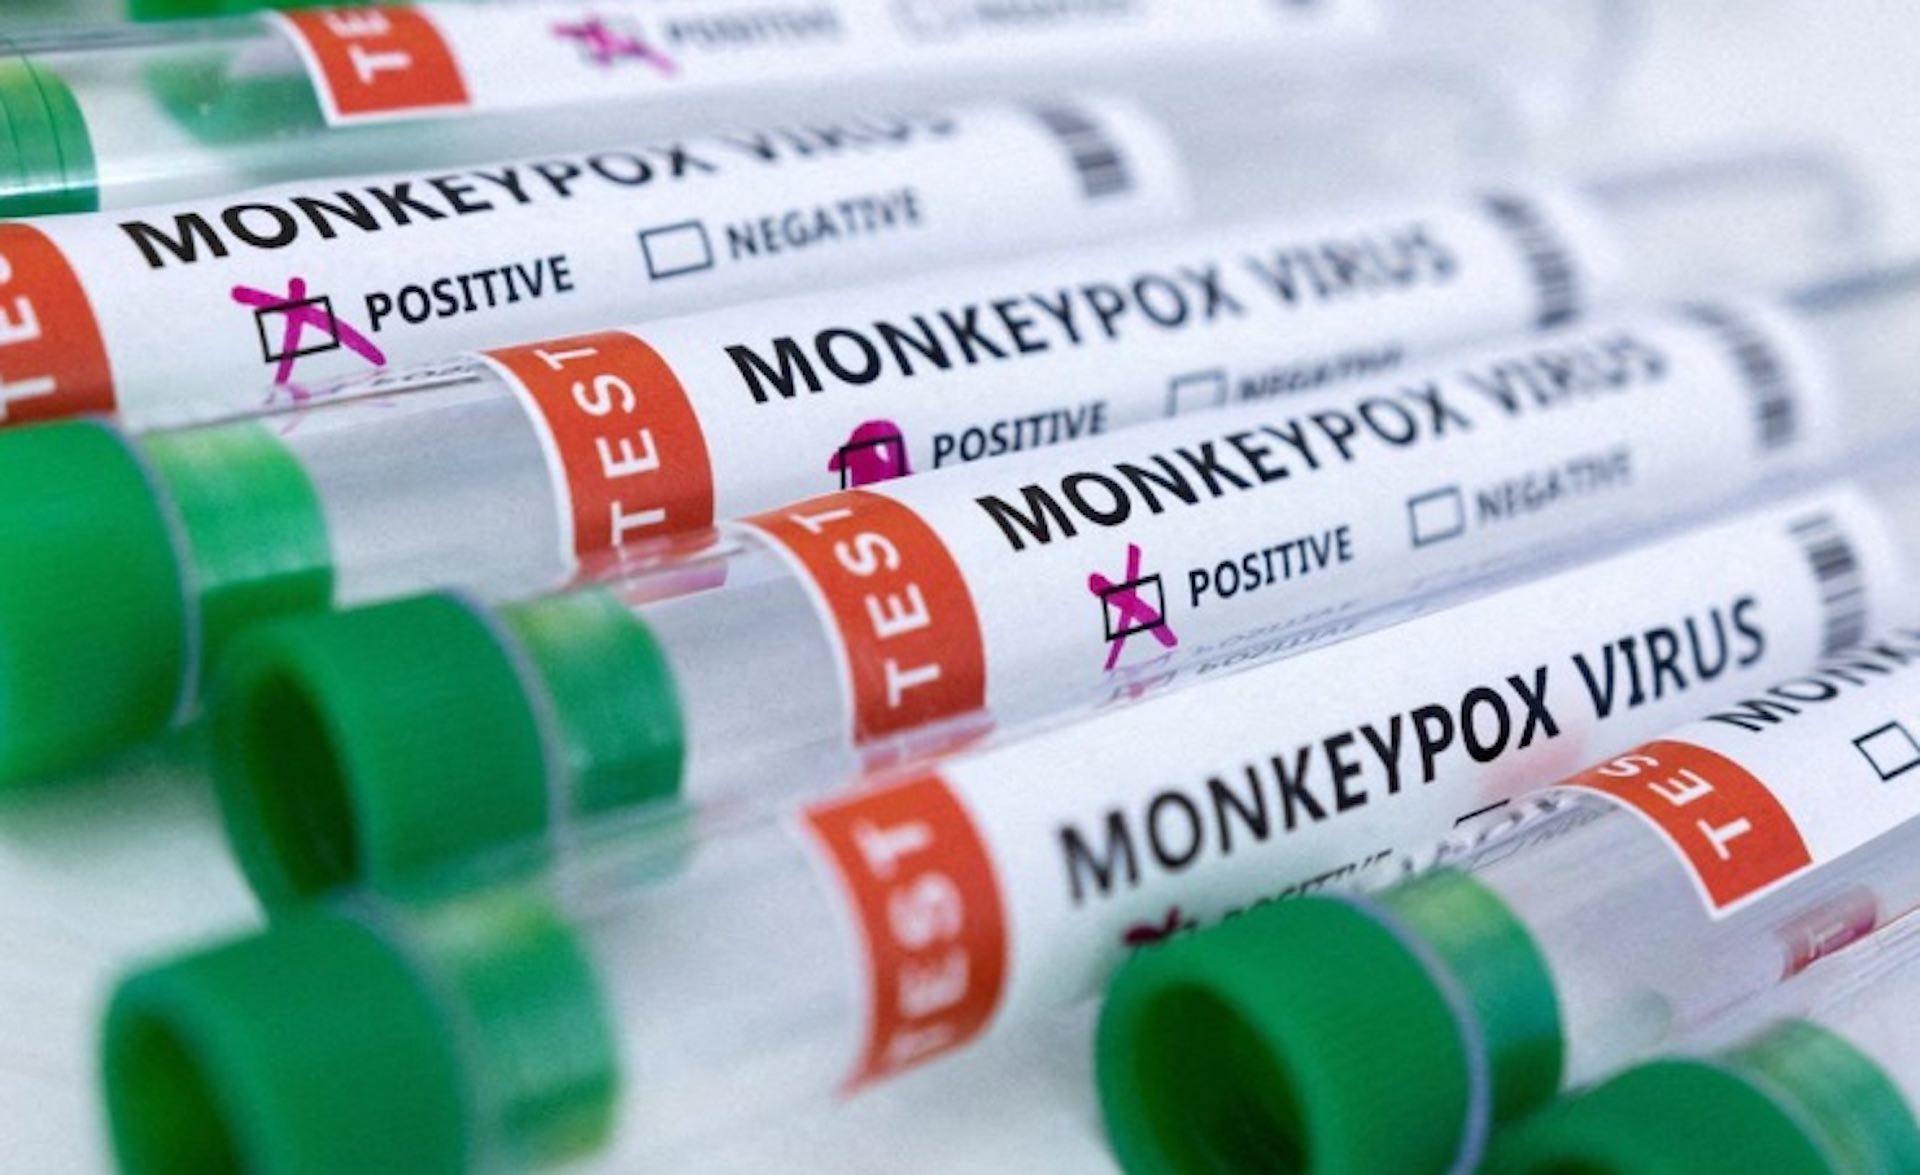 More Bavarian monkeypox vaccine doses secured by EU